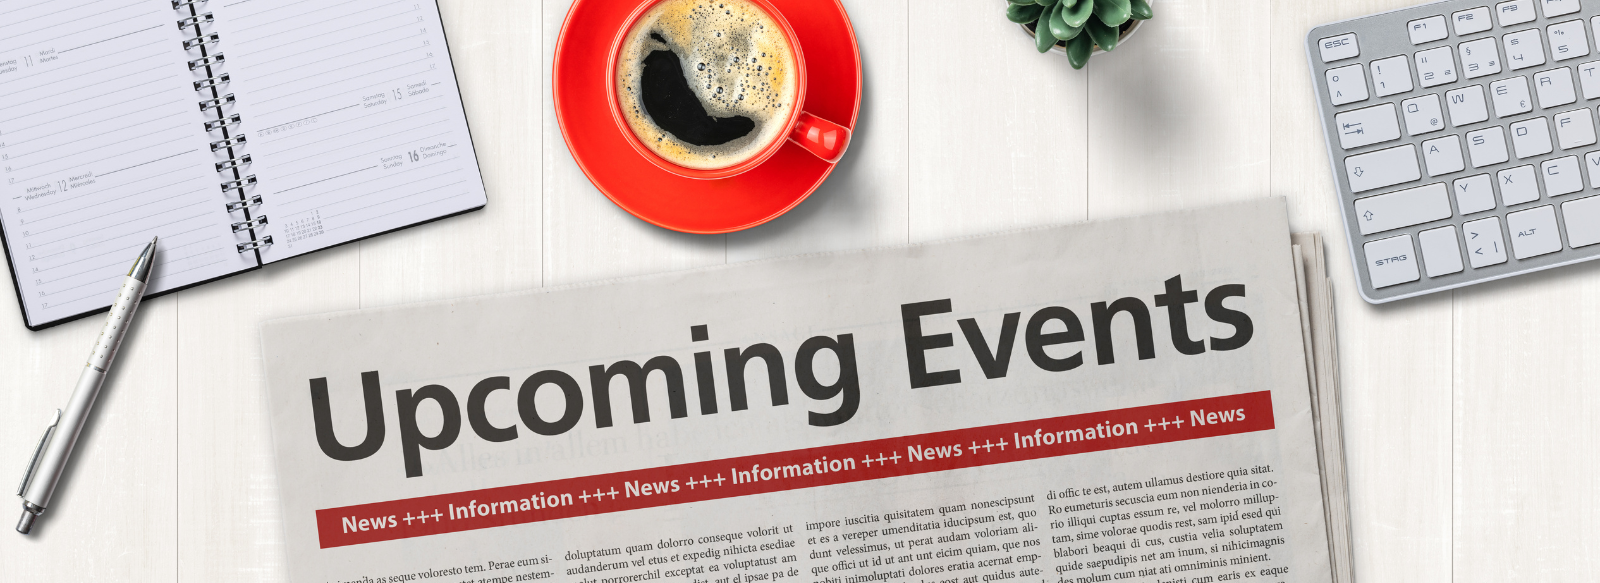 txt reads upcoming events, image of coffee cop, newspaper and calendar